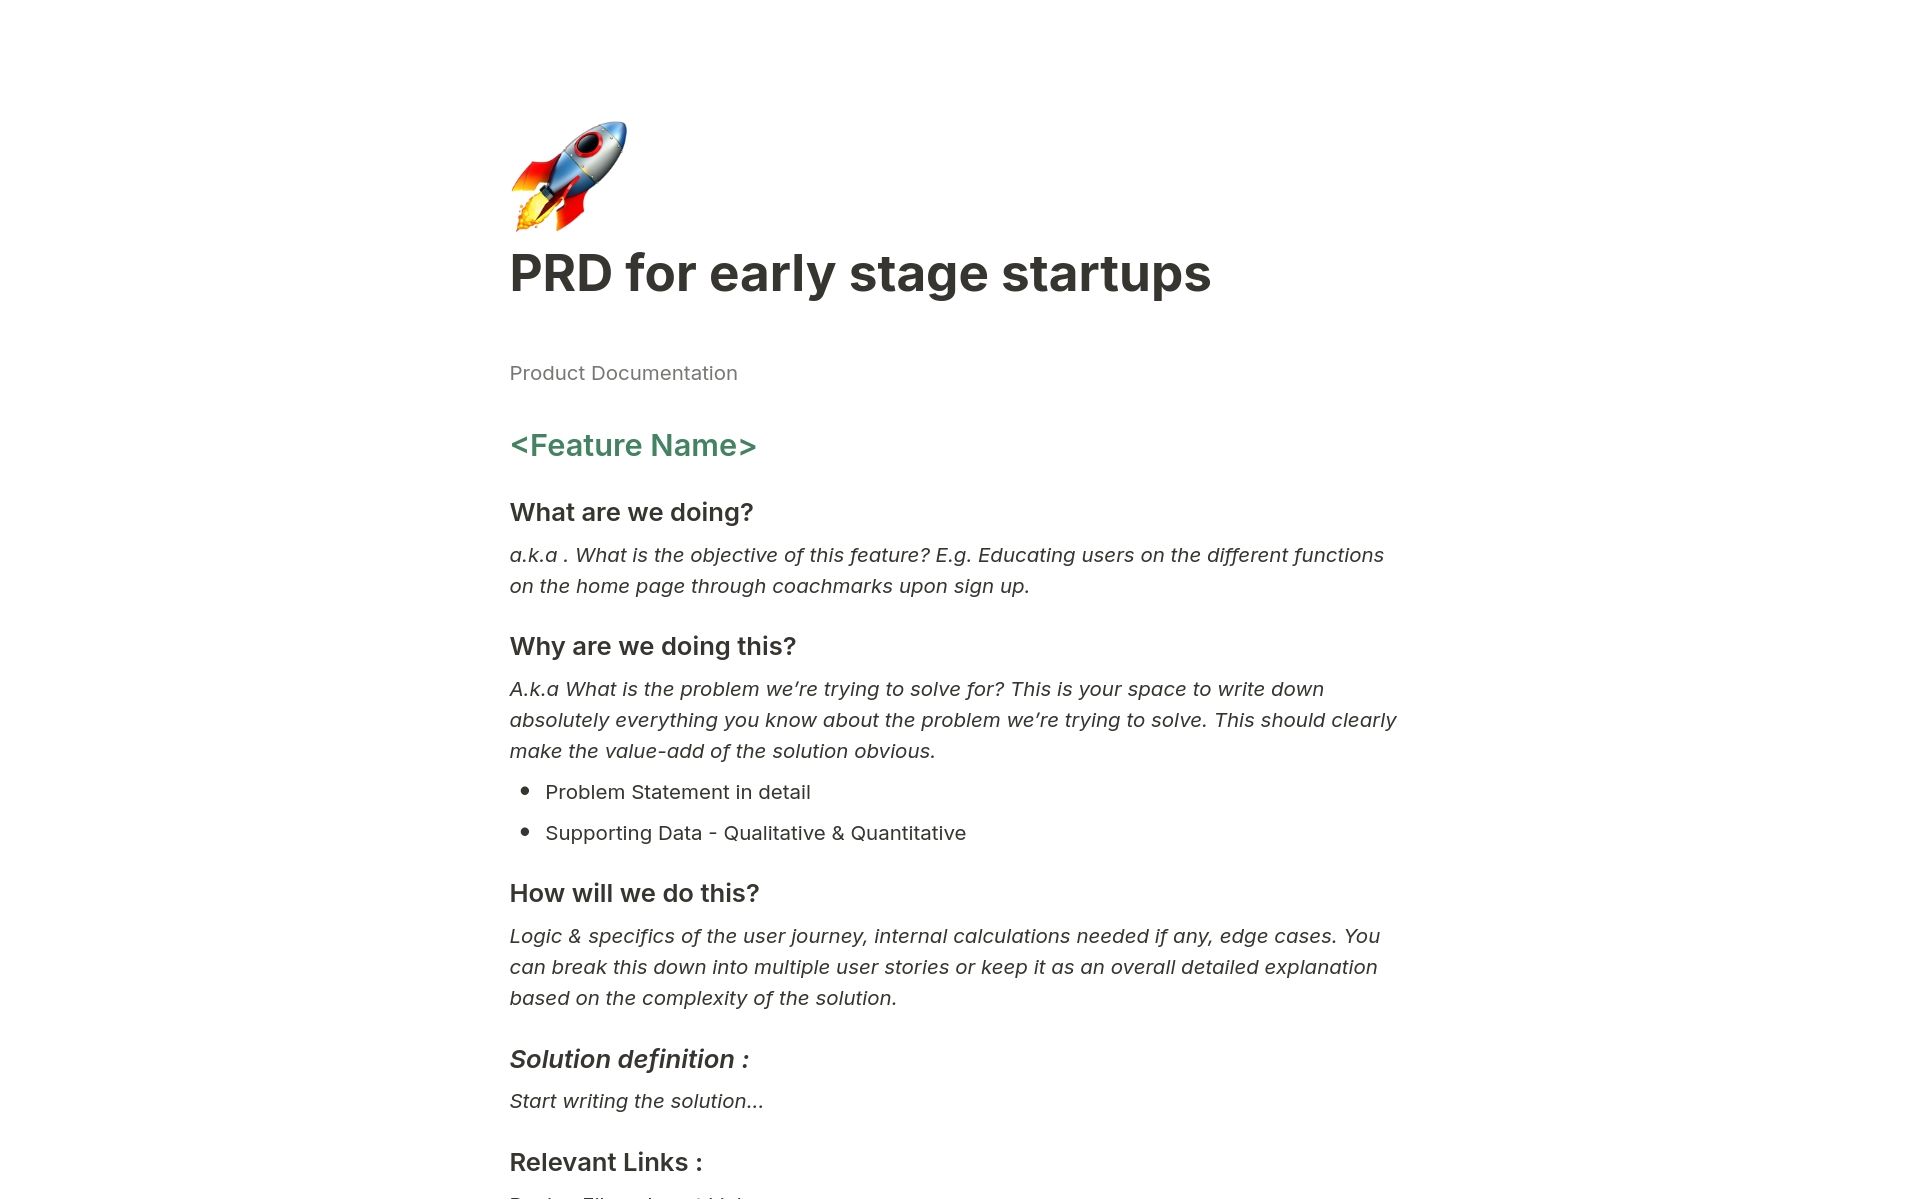 Building a product in a startup? The rules are slightly different and sometimes seemingly impossible 👀

Who even has time to write a full PRD? Stakeholder alignment needed, clarity & continuity, fast pace! Make it quick but also thorough!